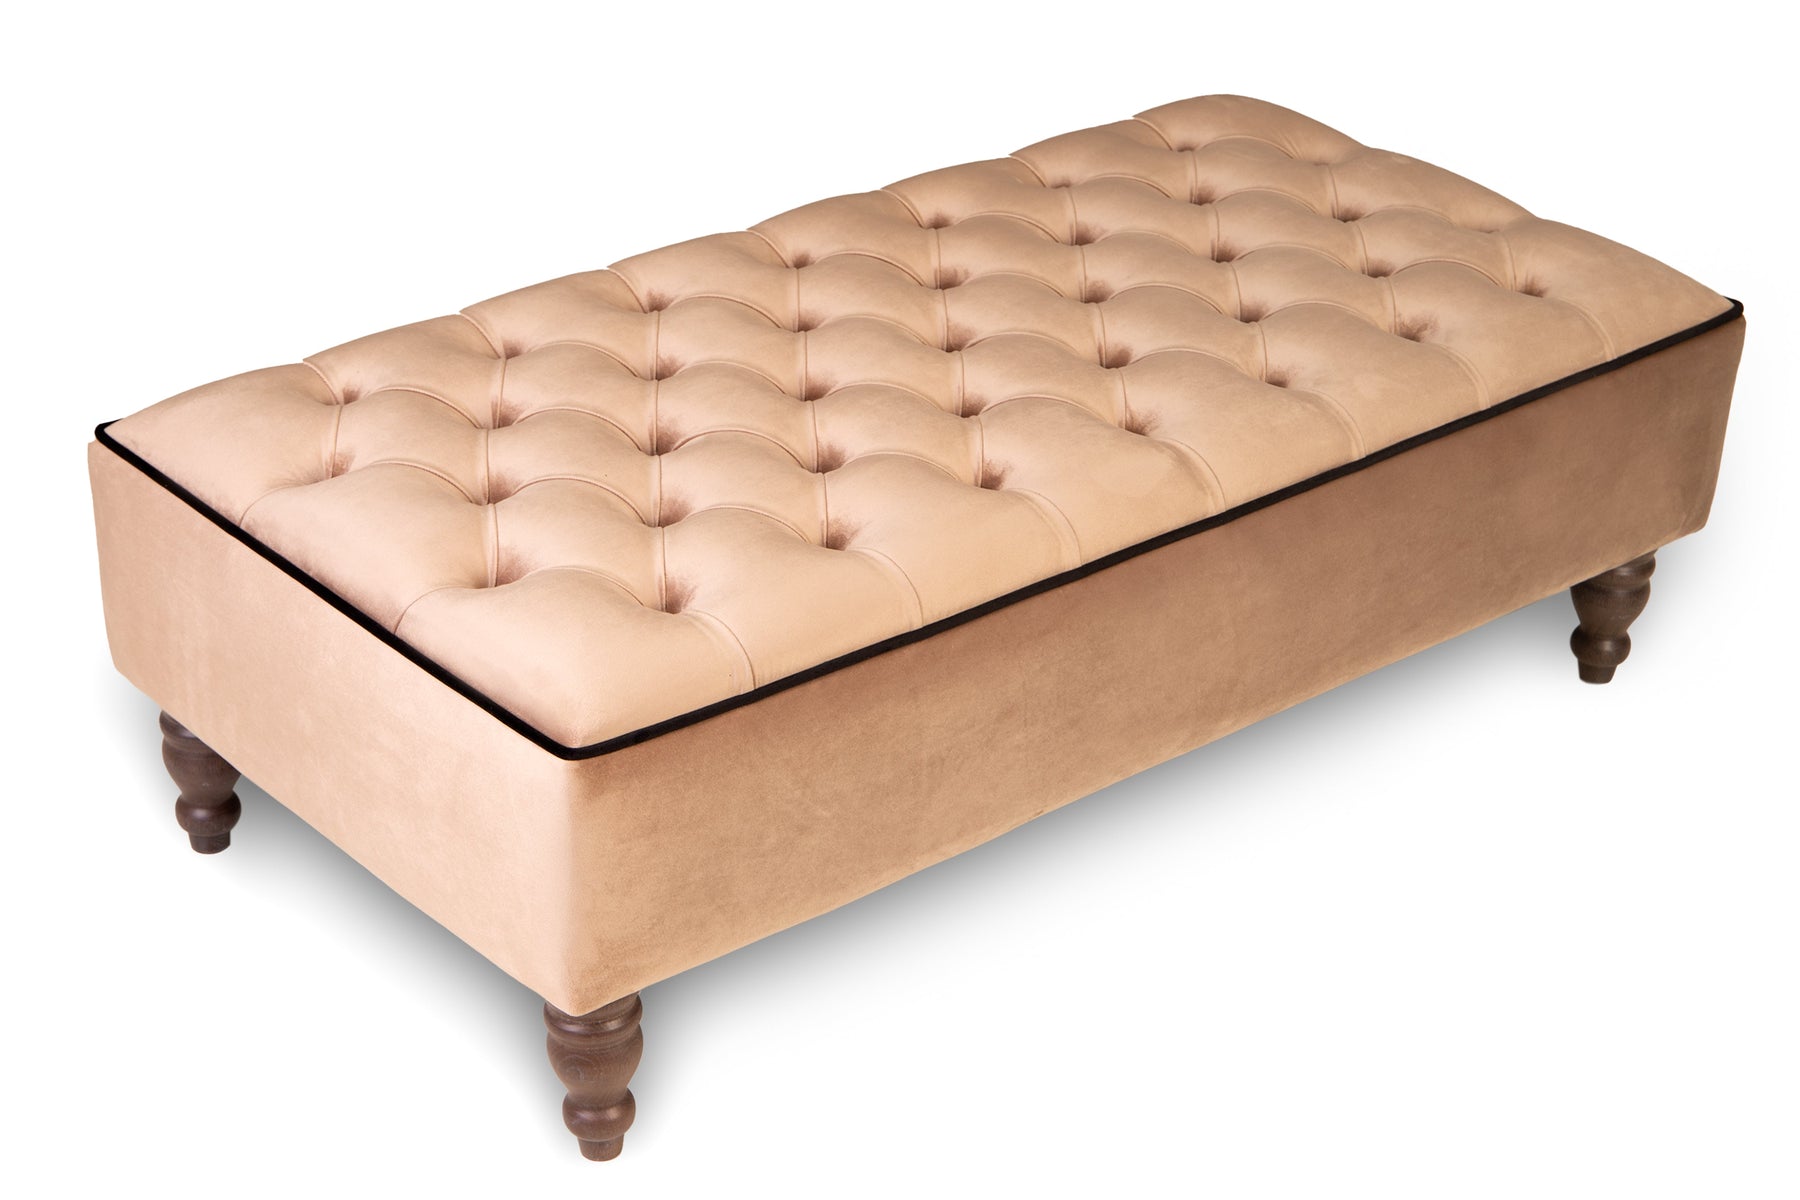 Belmont Chesterfield Upholstered Footstool / Coffee Table